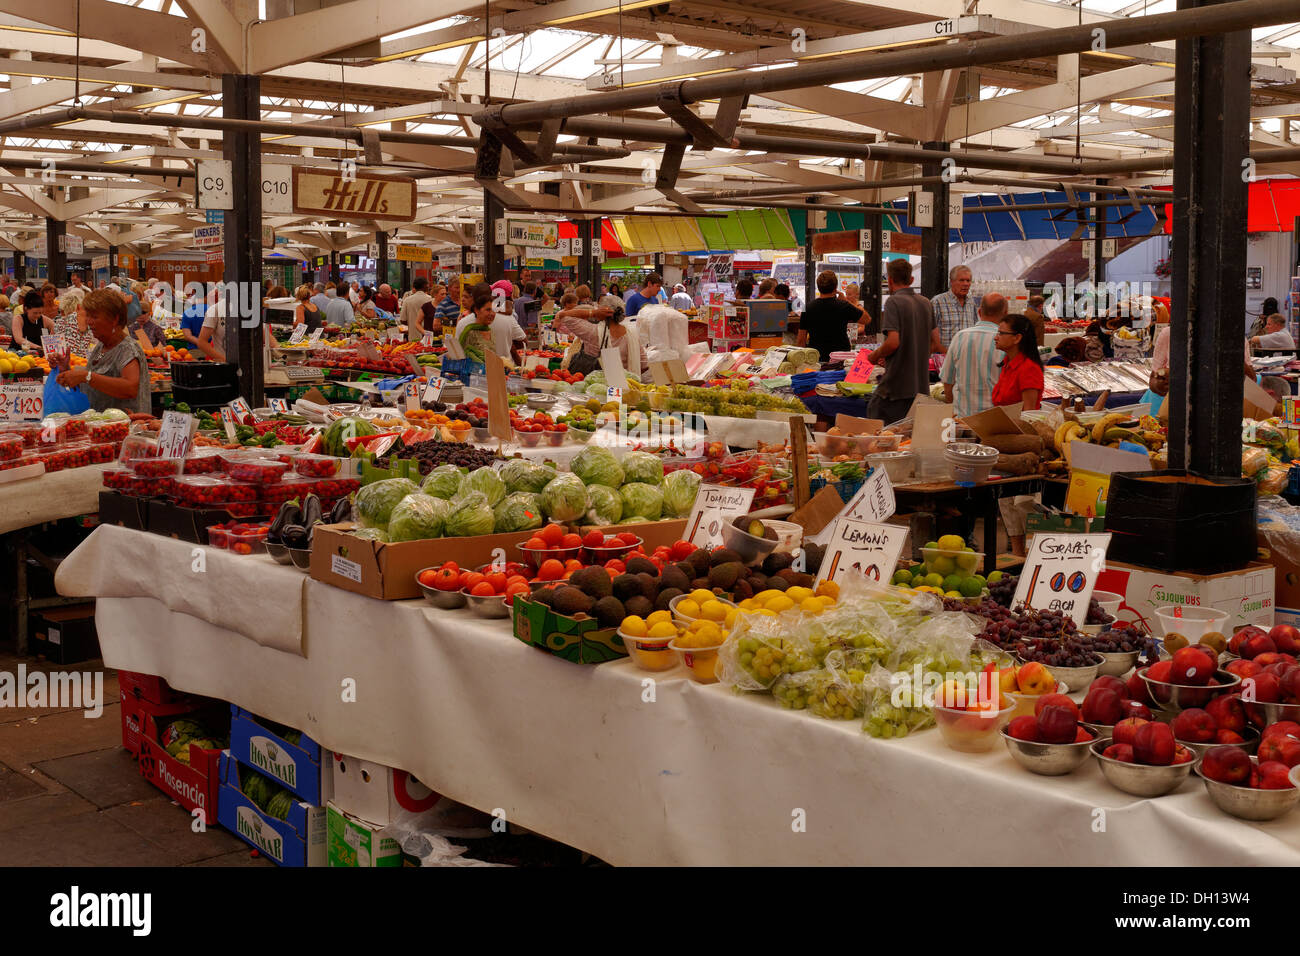 Busy fruit and veg market stalls, Leicester covered market, Leicester, England, UK Stock Photo